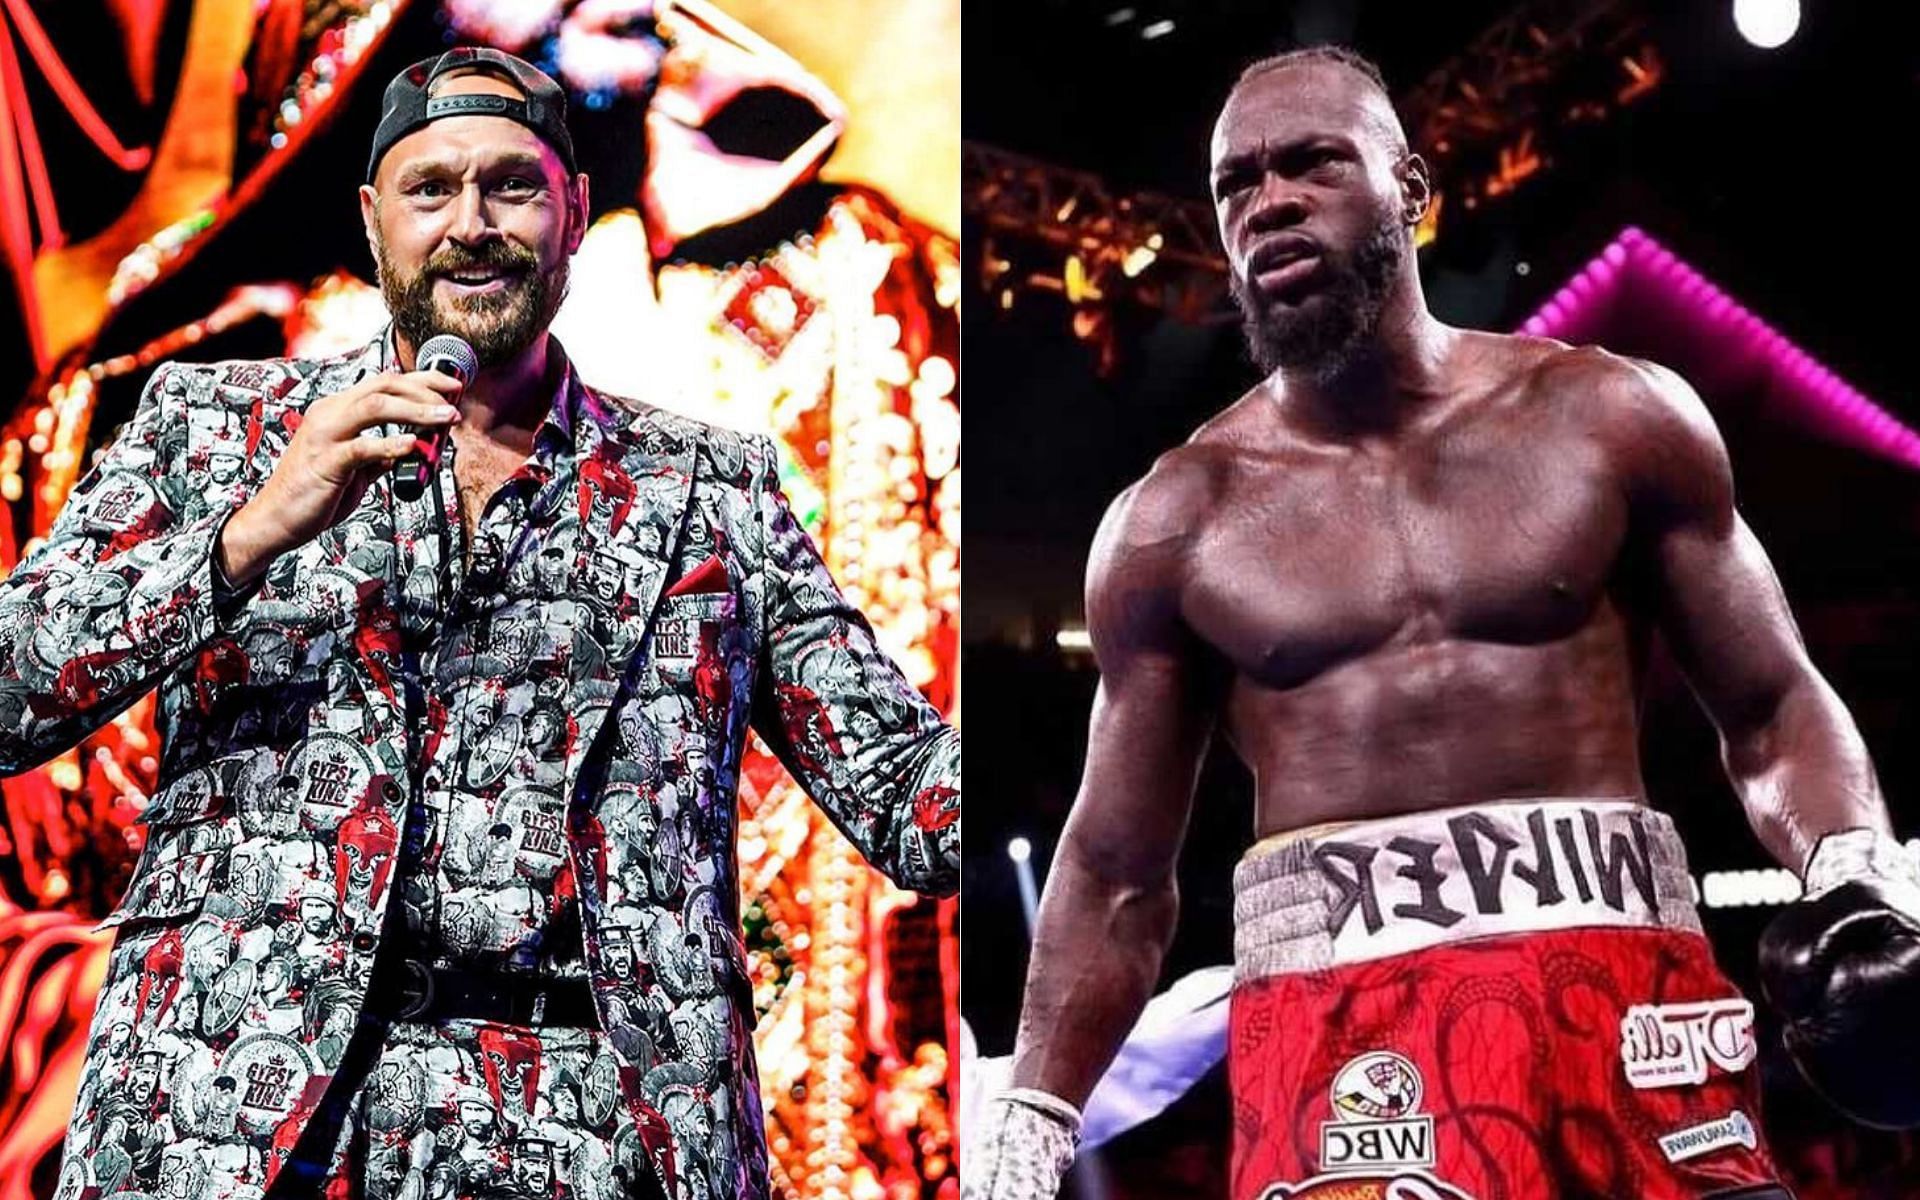 Tyson Fury (left) and Deontay Wilder (right) [Image credits: @tysonfury and @bronzebomber on Instagram]